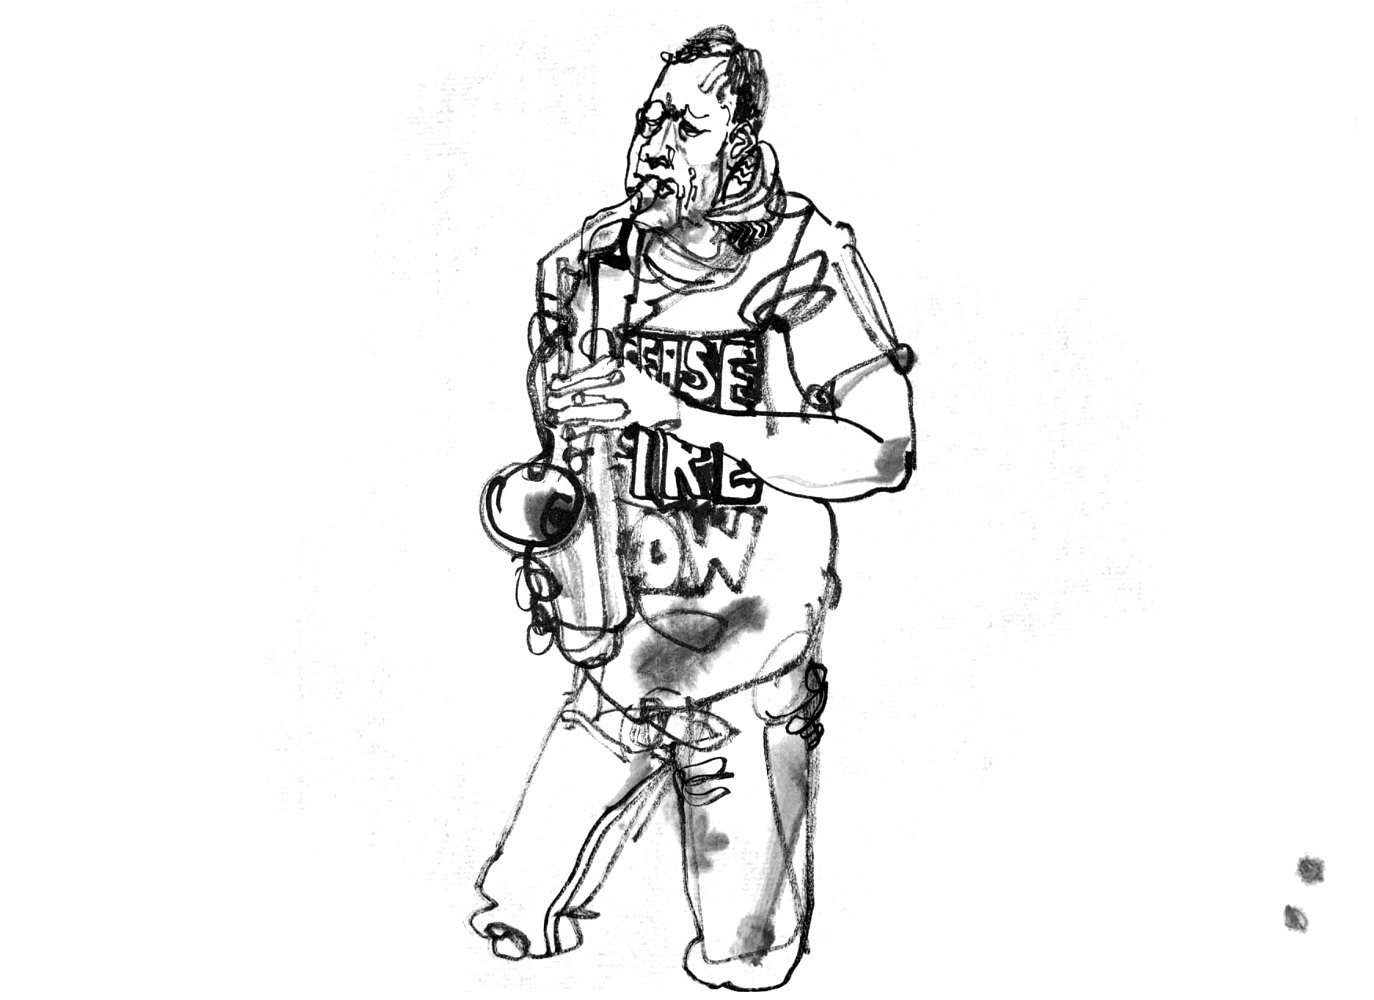 ink drawing of a saxophone player, wearing a t-shirt with 'ceasefire noe' lettering and a (origianally red white) kuffiyeh as scarf.